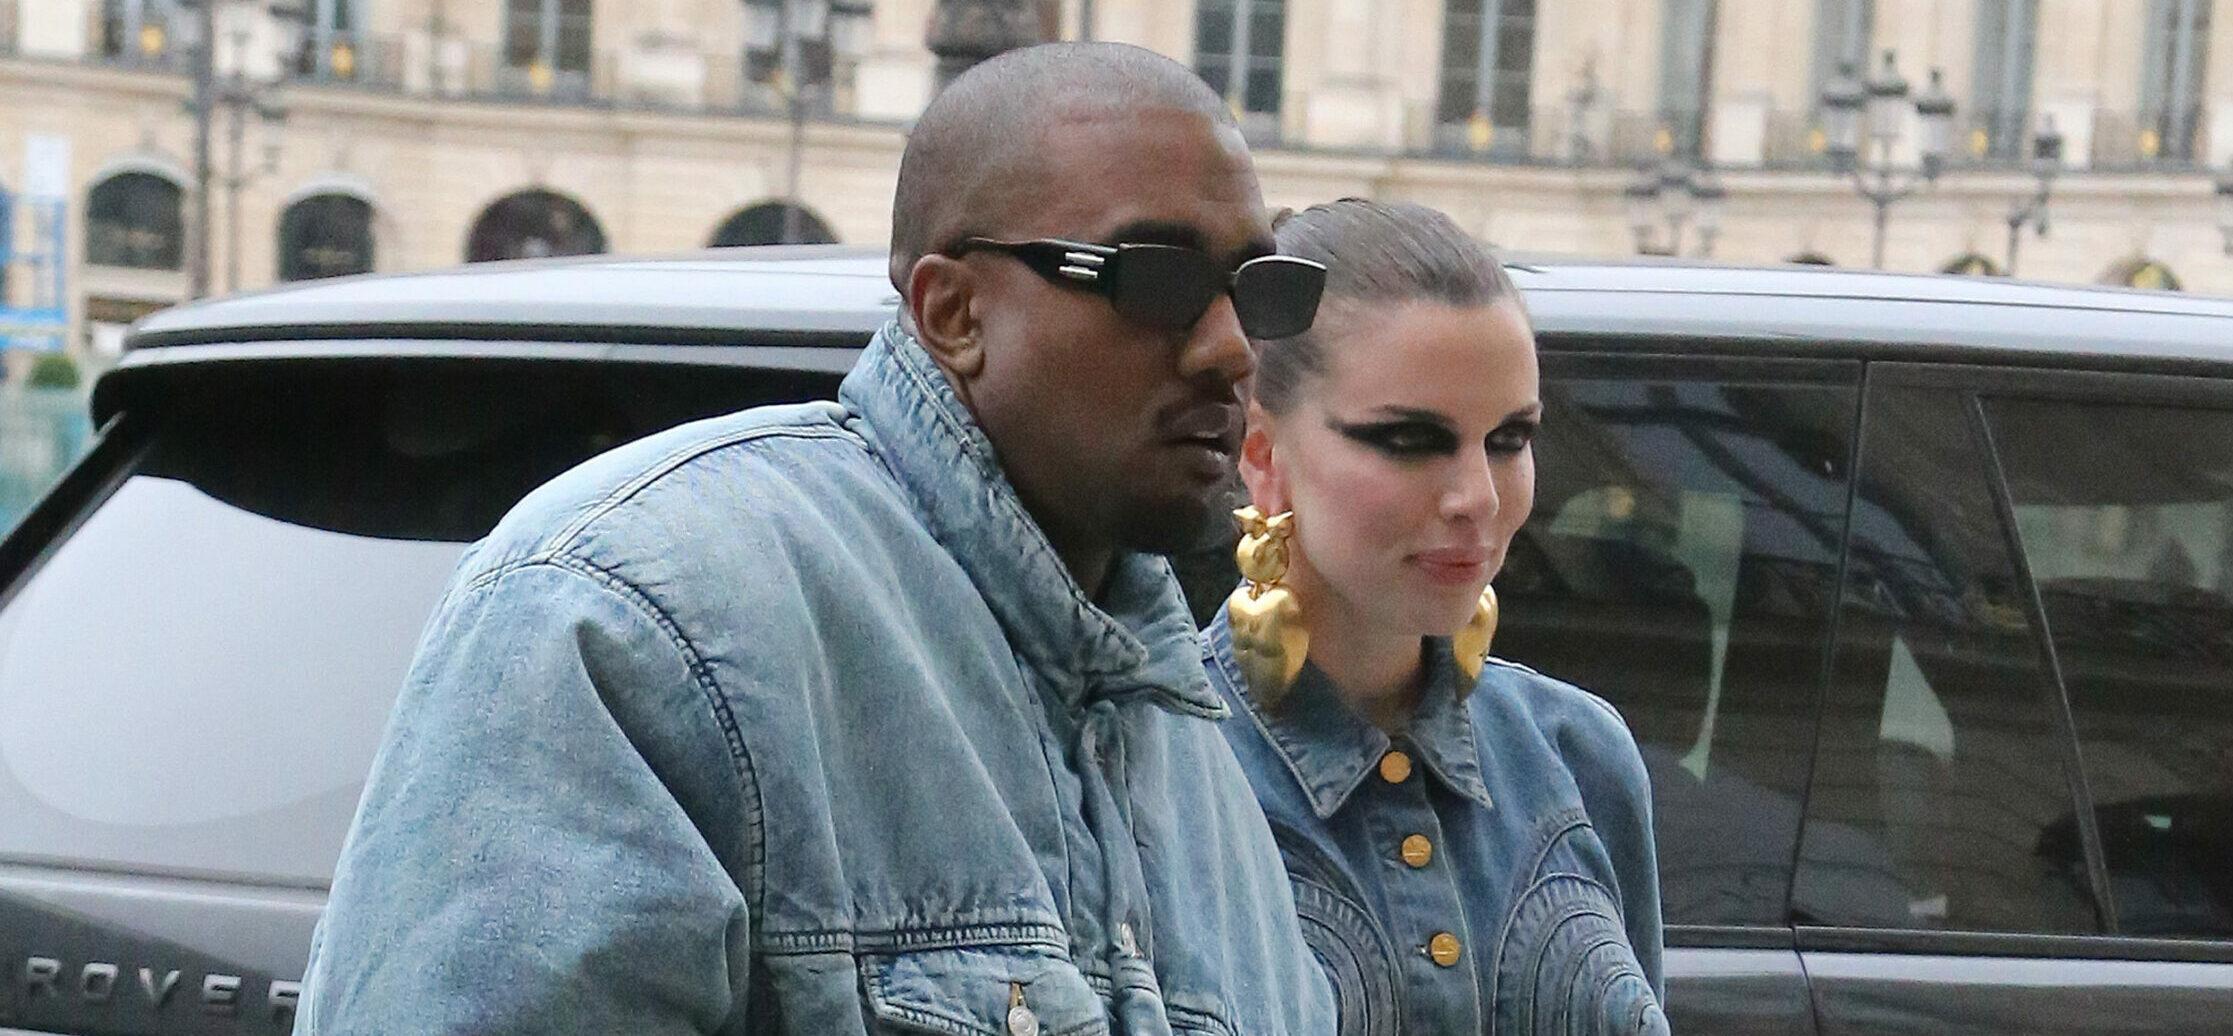 Kanye West and Julia Fox seen as they come back from the Kenzo show during the Fashion Week in Paris on january 23rd 2022. 23 Jan 2022 Pictured: Kanye West and Julia Fox. Photo credit: KCS Presse / MEGA TheMegaAgency.com +1 888 505 6342 (Mega Agency TagID: MEGA822016_001.jpg) [Photo via Mega Agency]